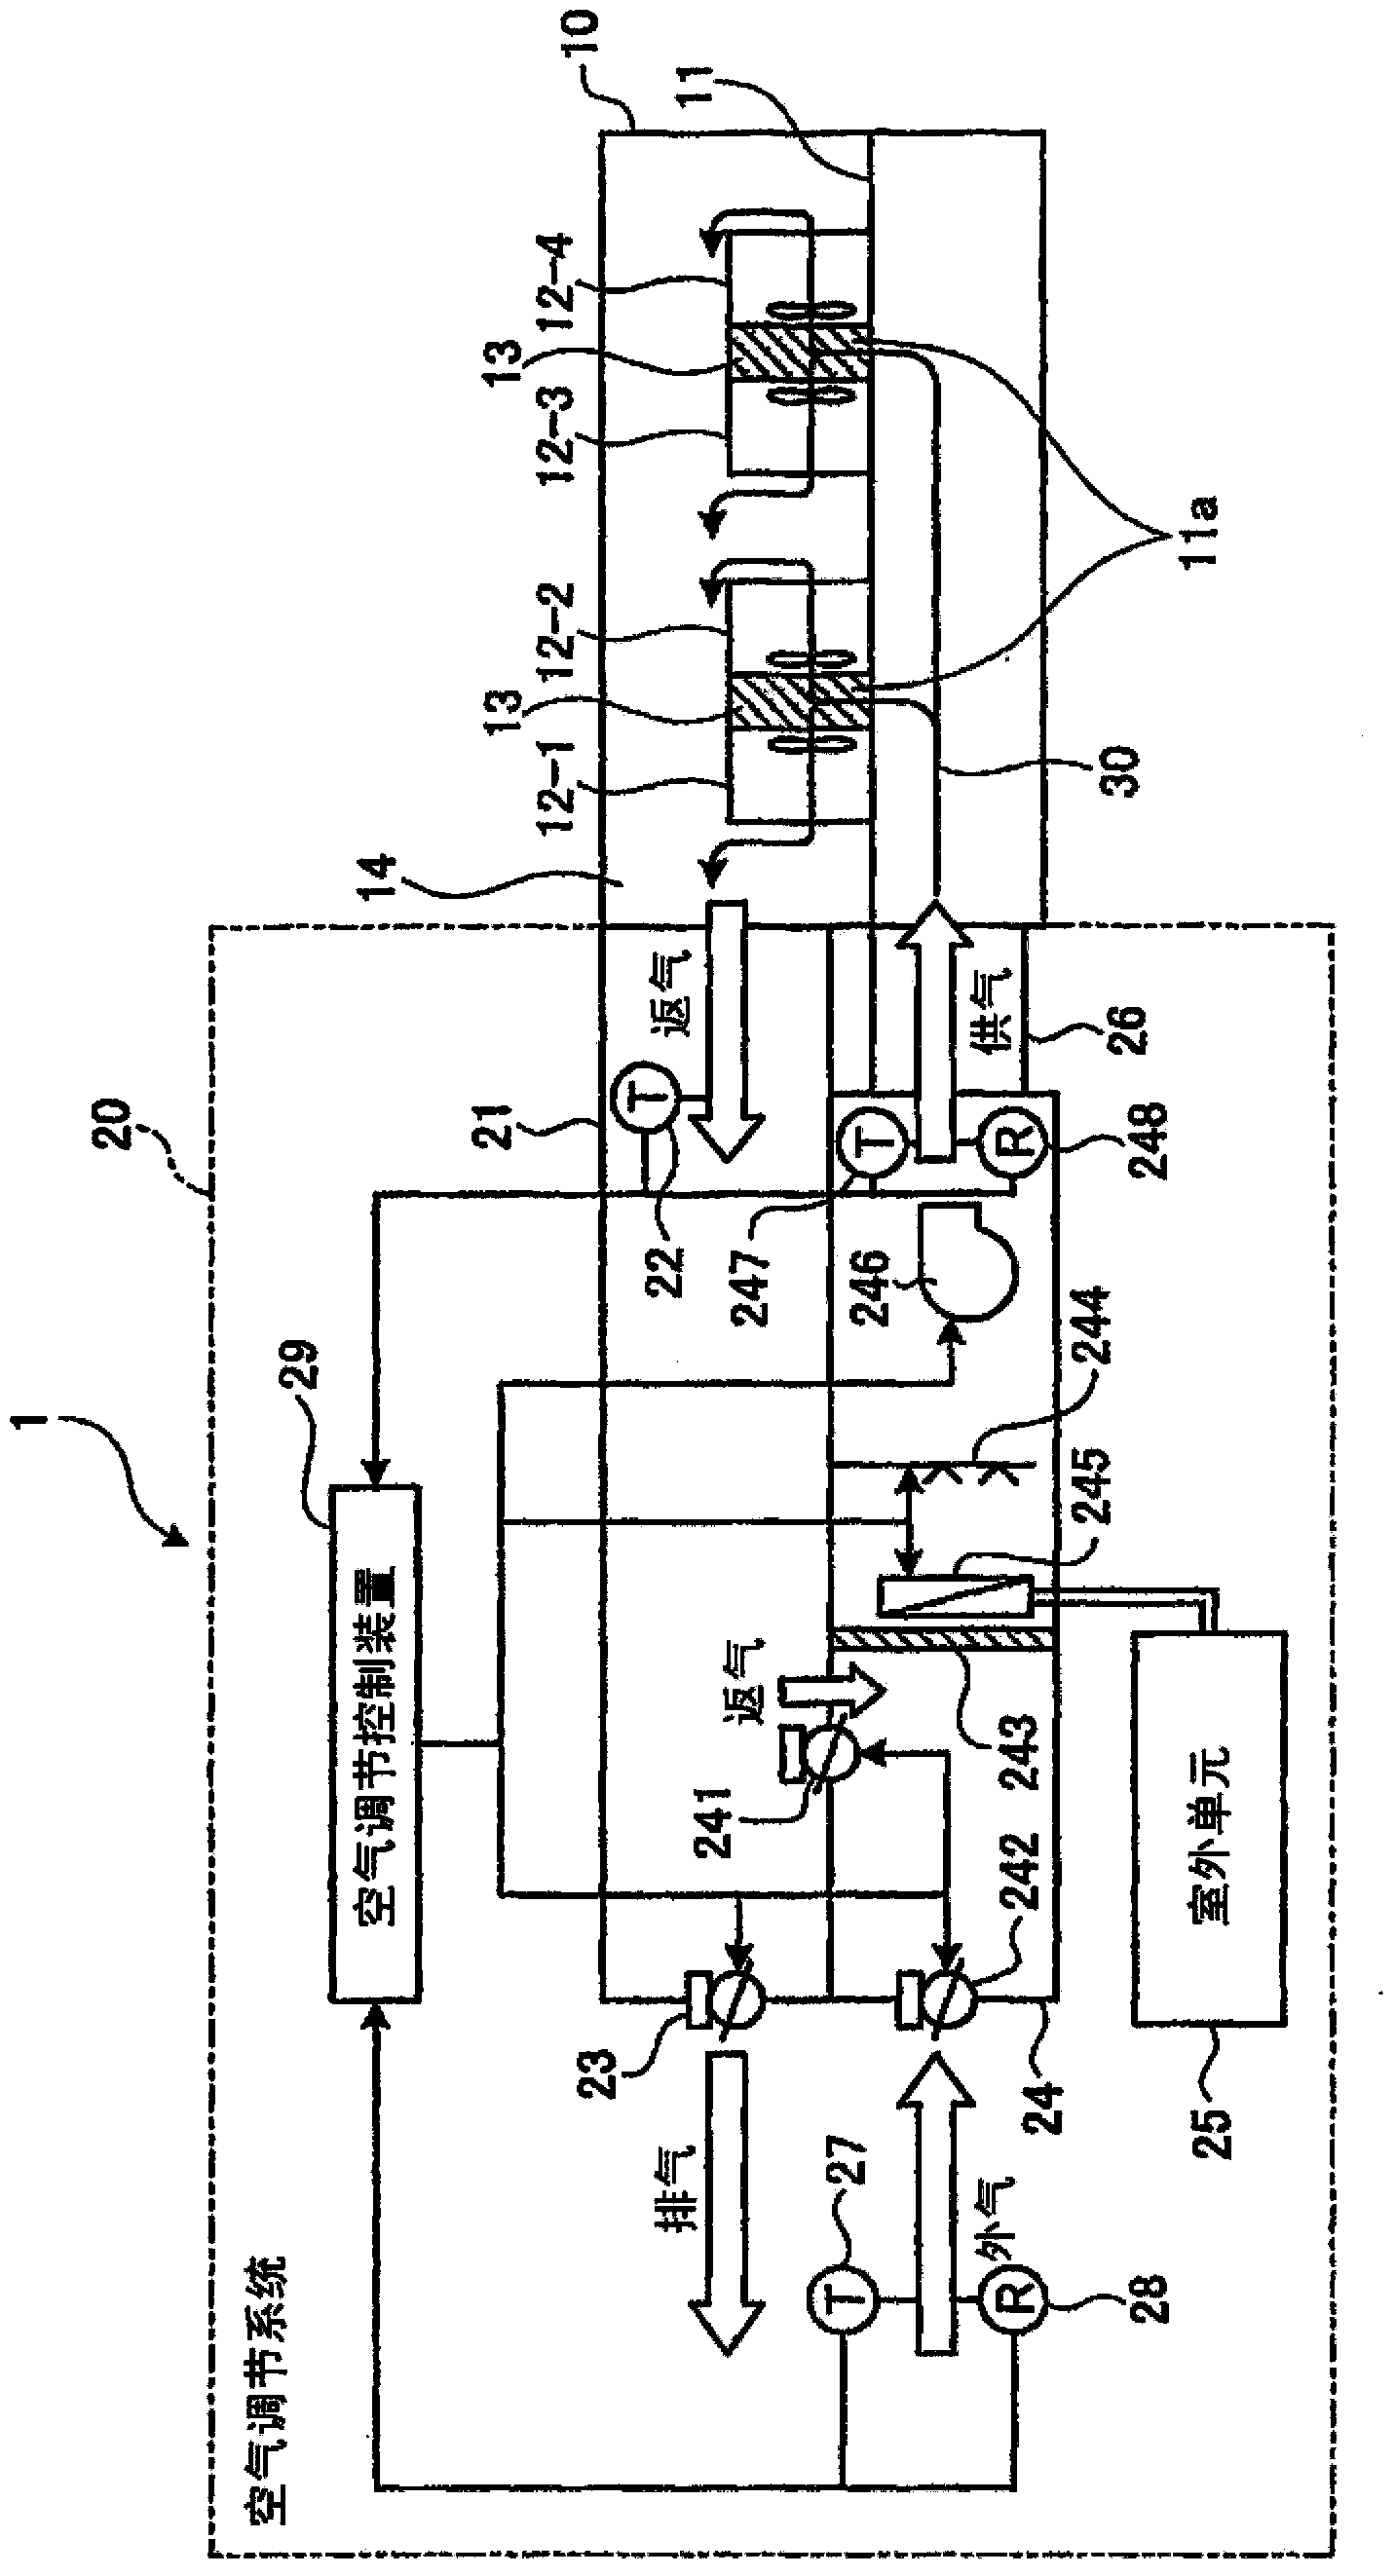 Air conditioning system and air conditioning control method for server room management